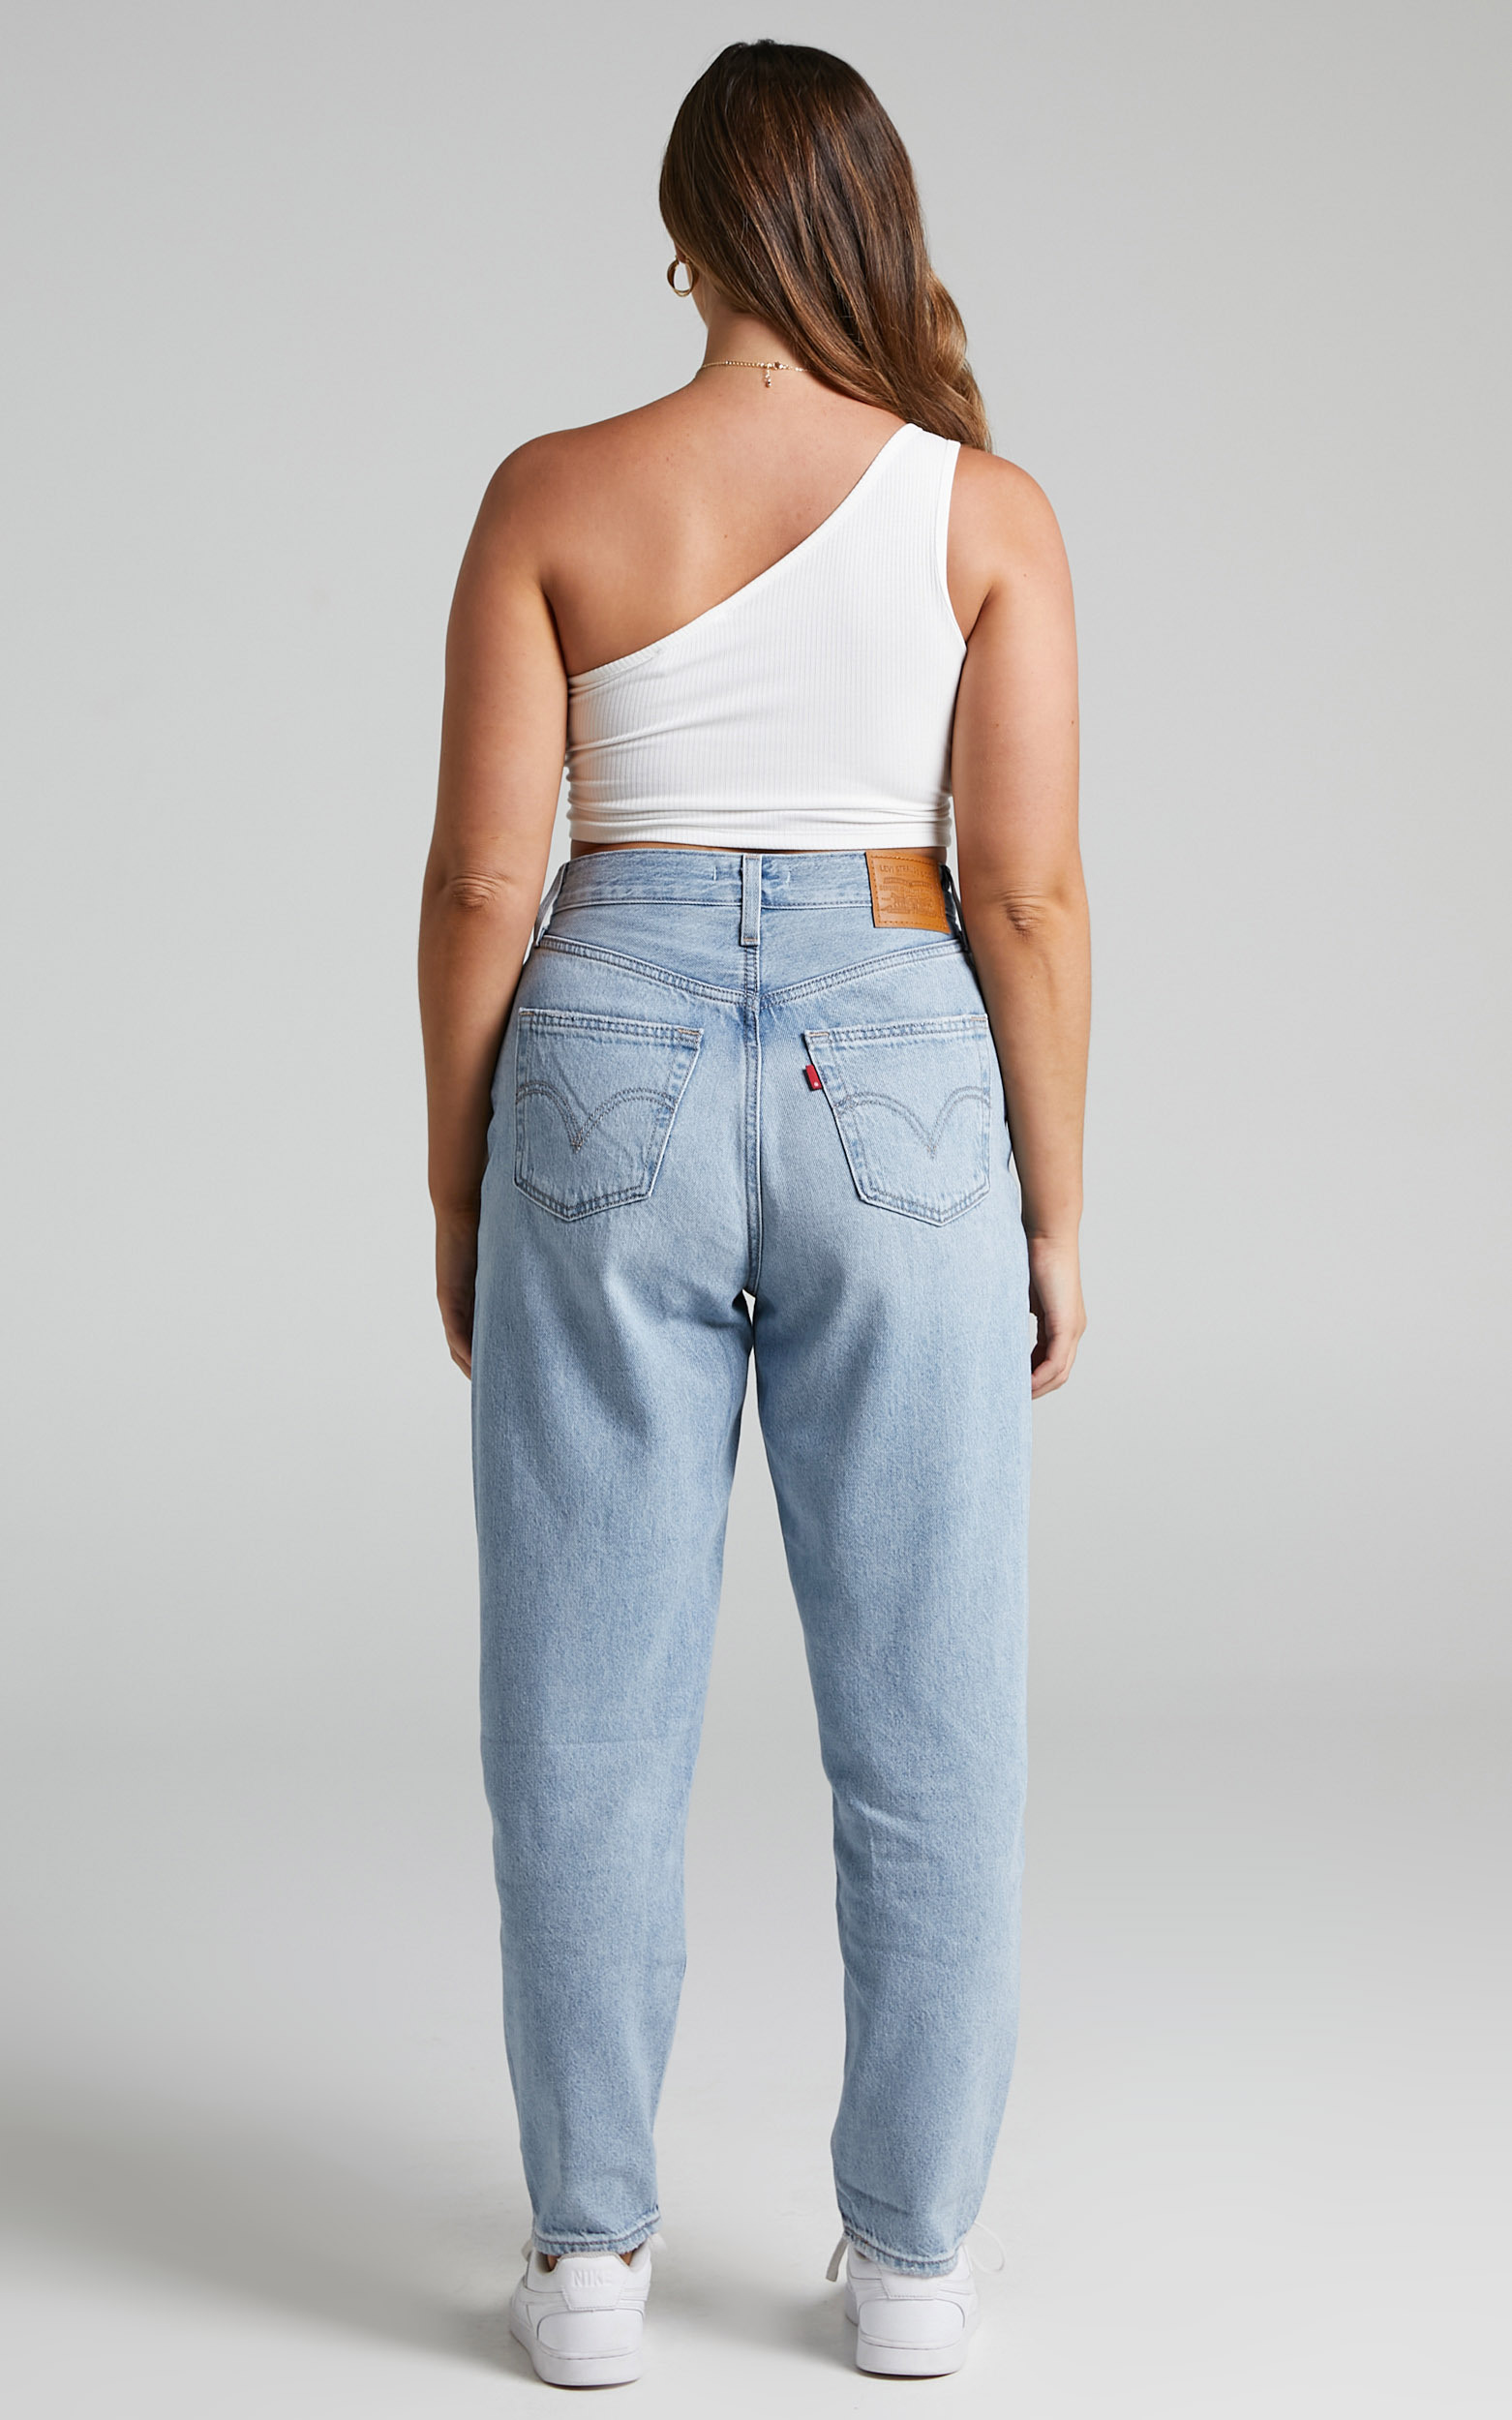 Levi's - High Loose Taper Jean in Here to stay | Showpo USA